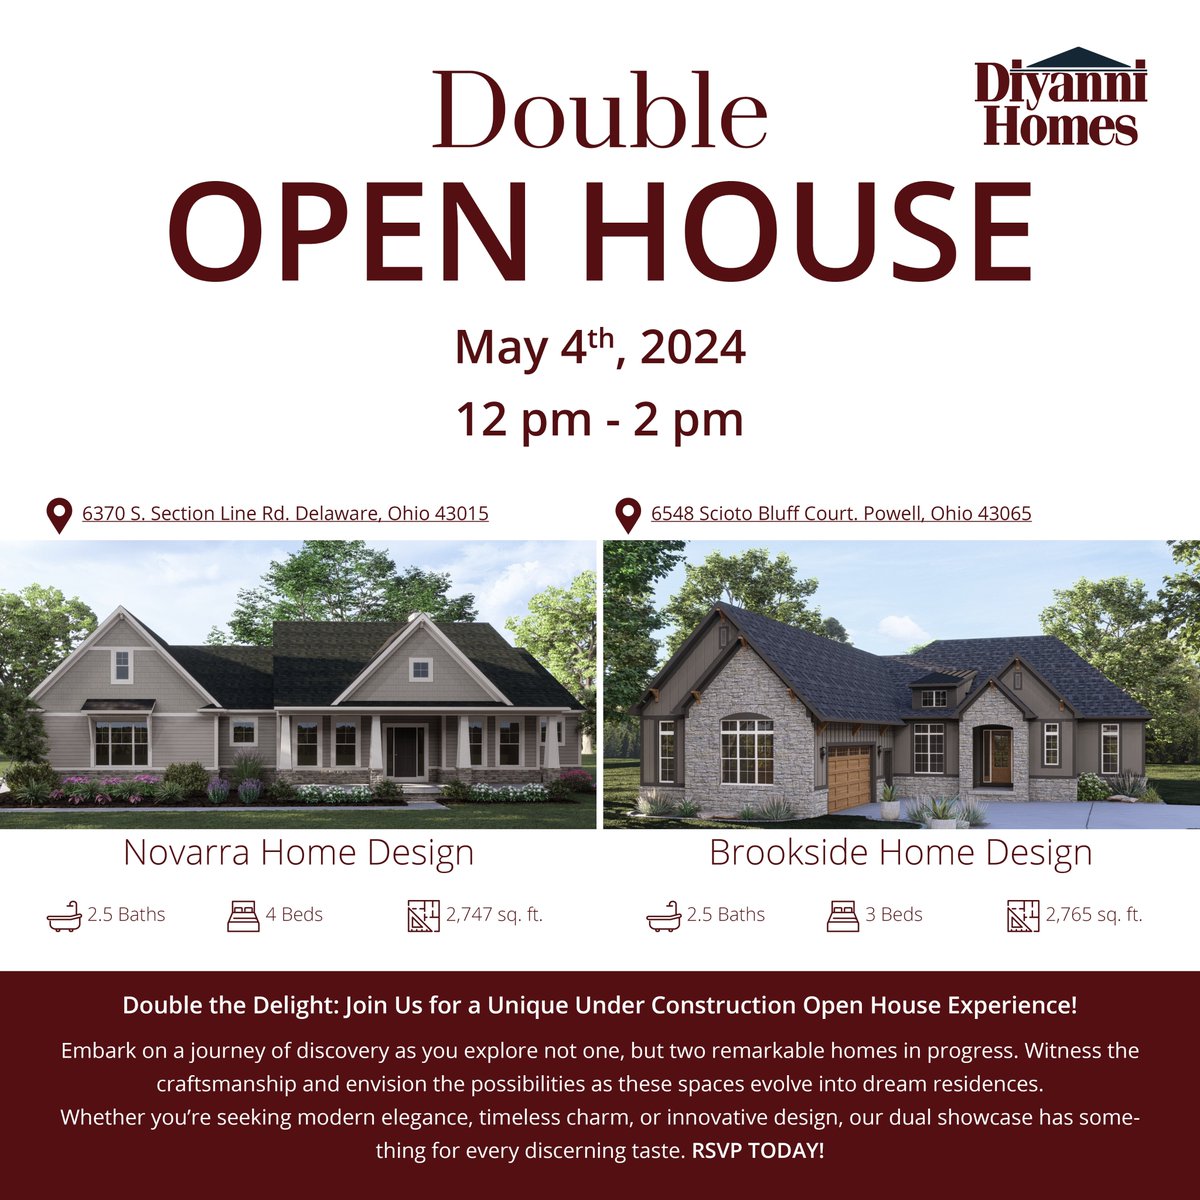 Join us for an exclusive journey of discovery as we unveil not one, but TWO remarkable homes in progress!
RSVP to Explore:
Novarra: Link to RSVP
Brookside: Link to RSVP
#DiyanniHomes #DiyanniDifference #HomeDesign #UnderConstruction #DreamHomes